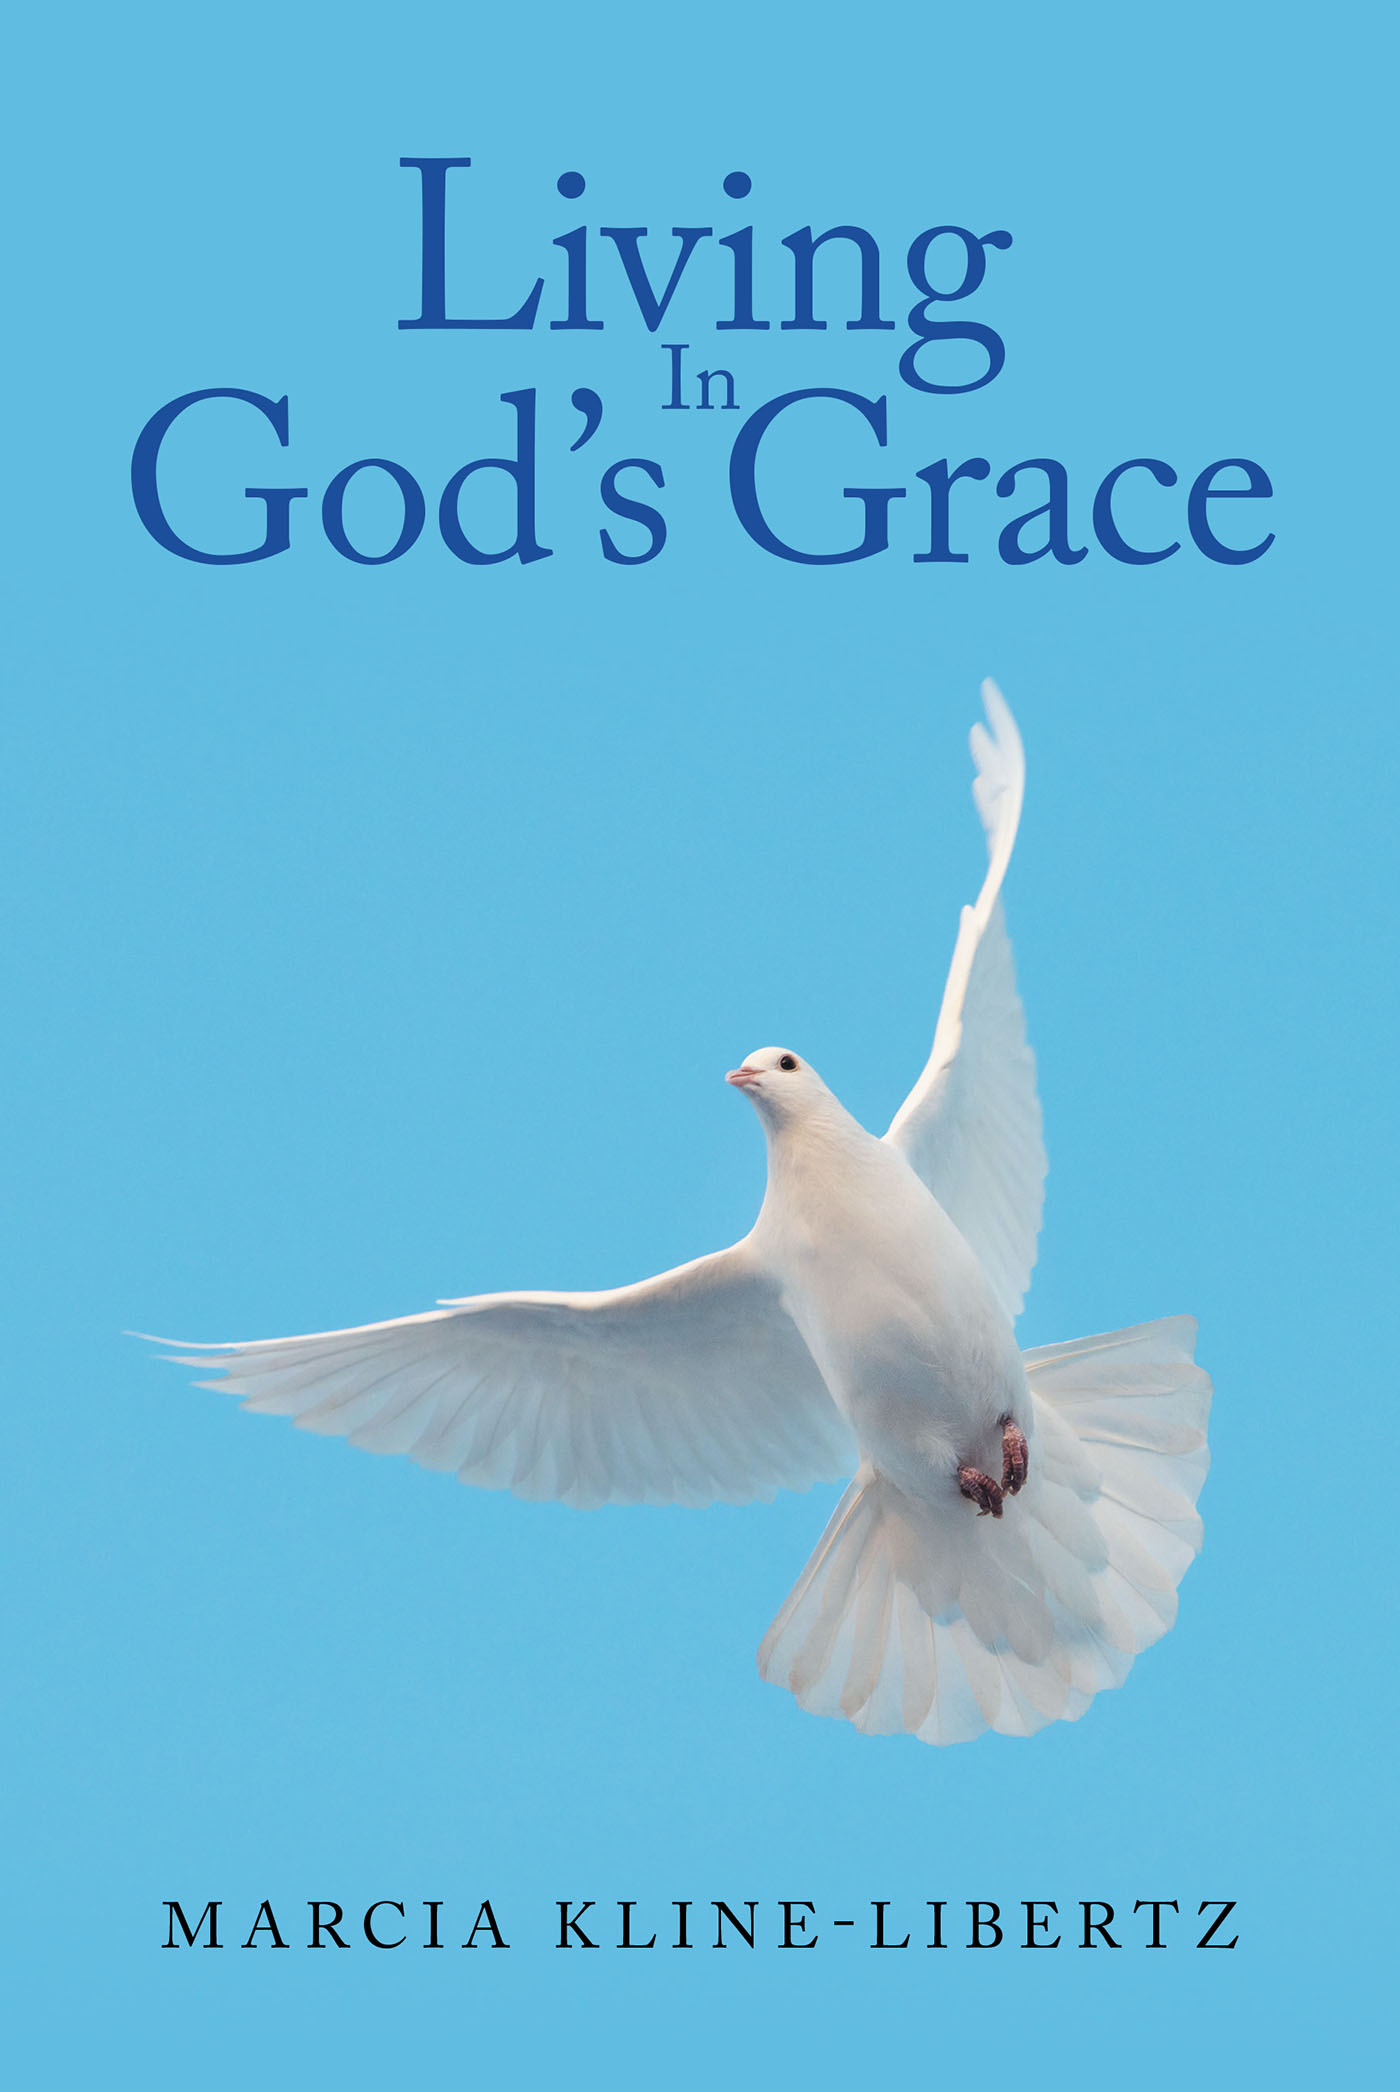 Marcia Kline-Libertz’s New Book, "Living in God's Grace," is a Collection of Biblical Selections and Prayers to Motivate One’s Prayer Life and Relationship with the Lord